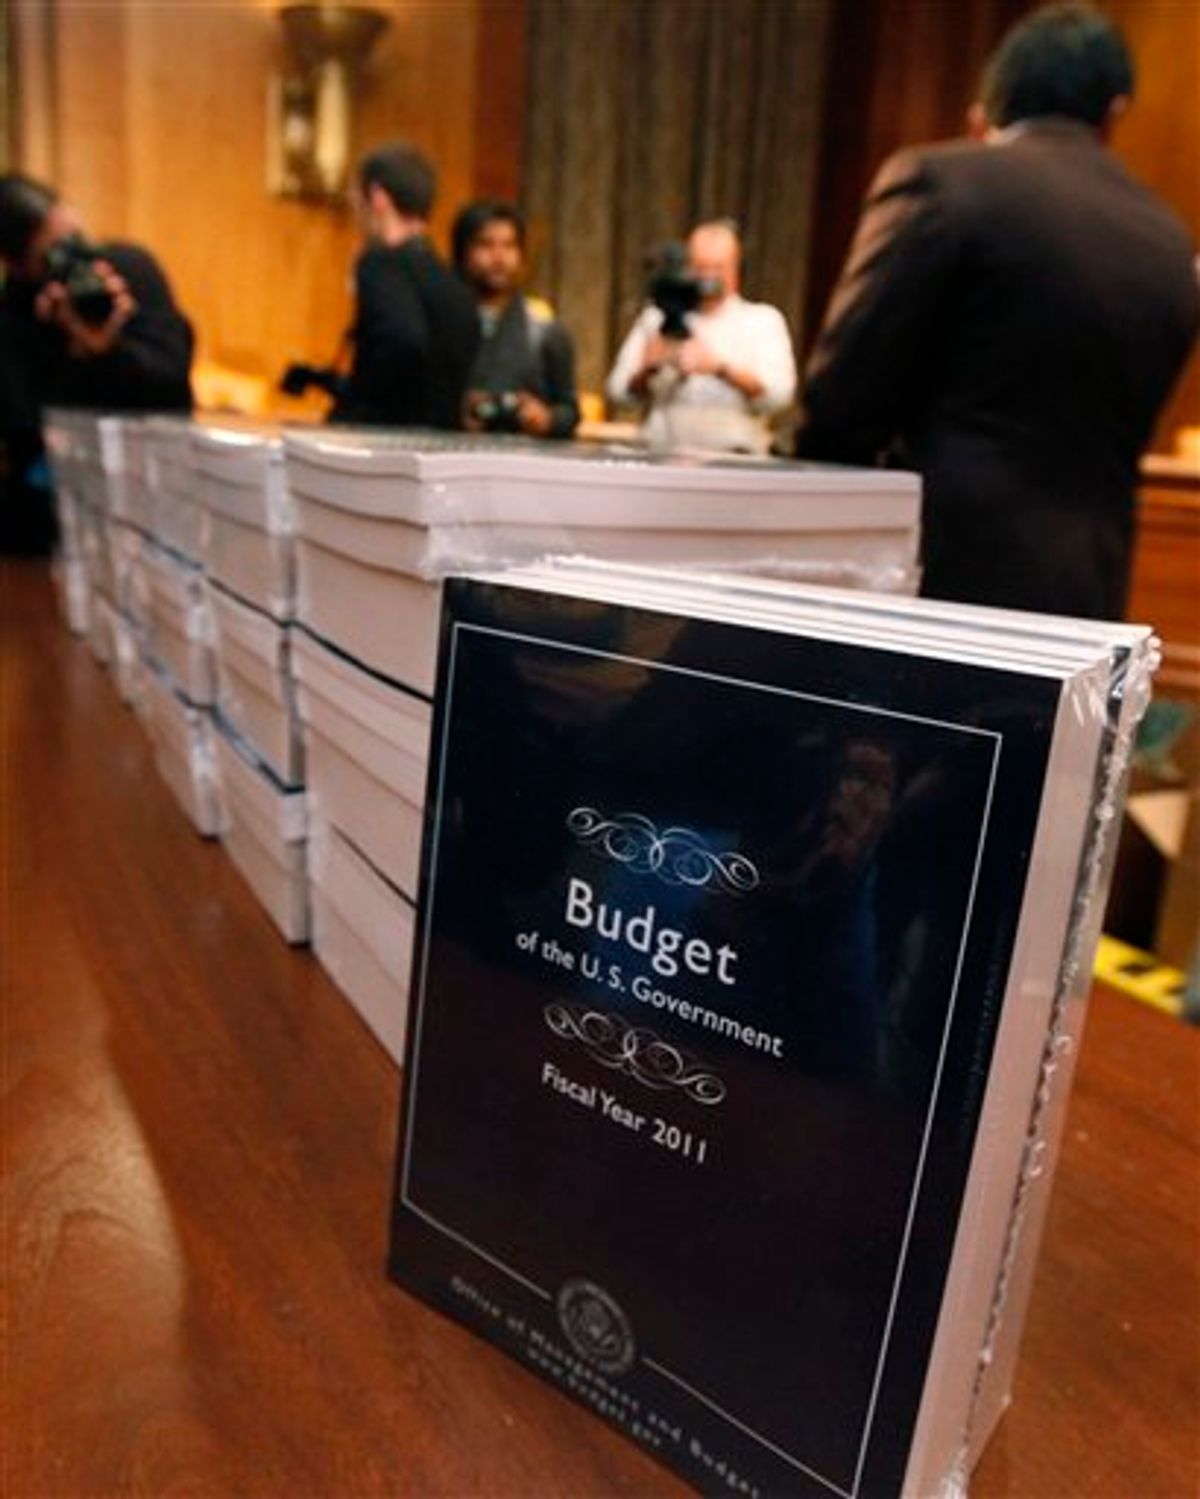 Copies of President Barack Obama's budget are seen on Capitol Hill in Washington, Monday, Feb. 1, 2010, as it was delivered to the Senate Budget Committee.  (AP Photo/Manuel Balce Ceneta) (AP)